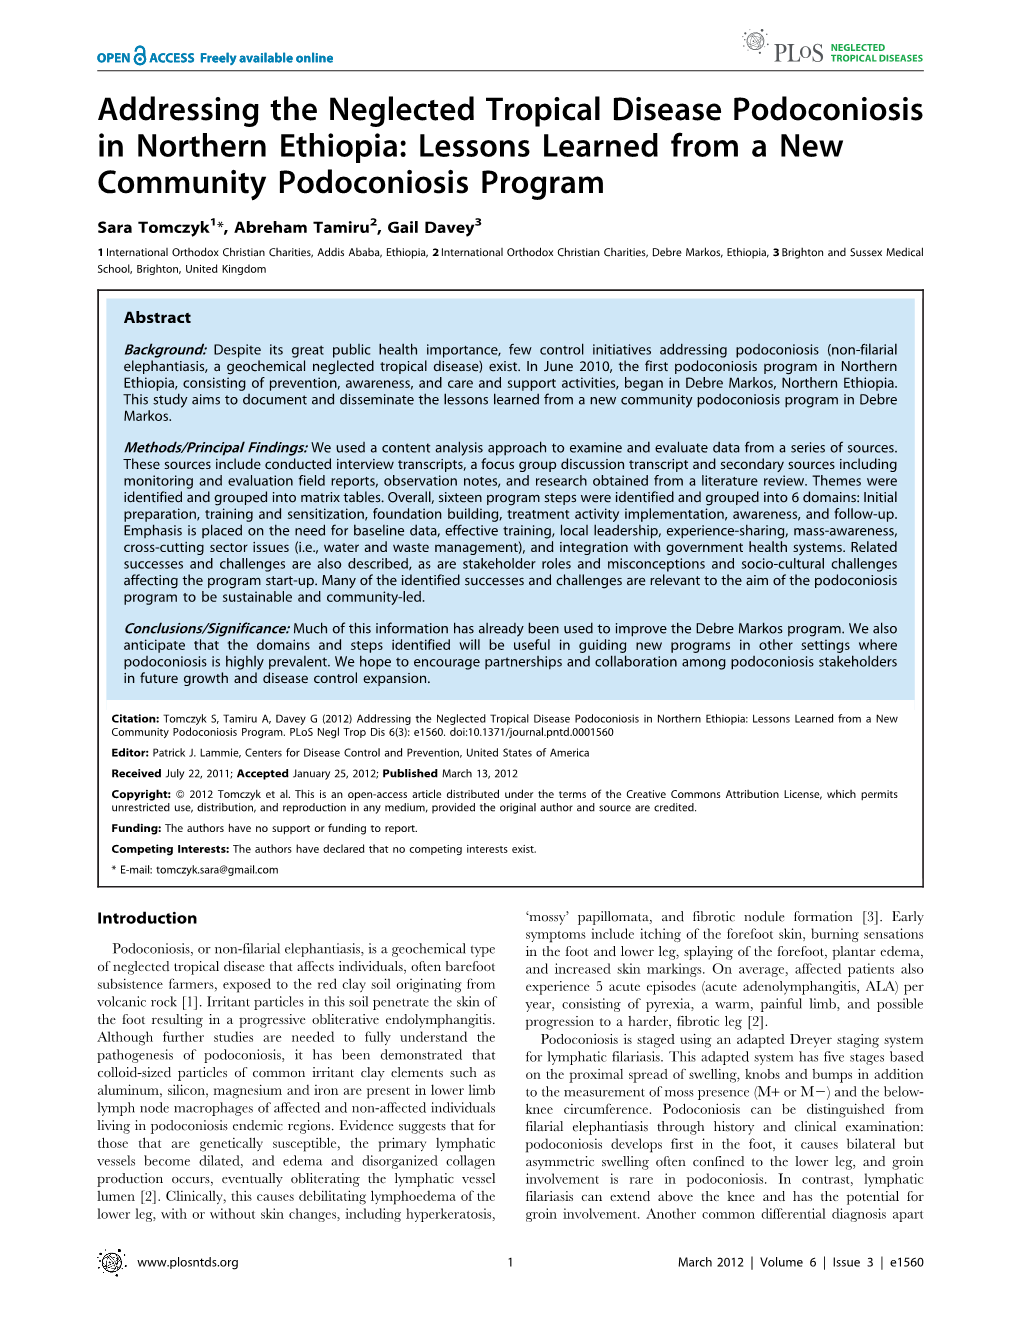 Addressing the Neglected Tropical Disease Podoconiosis in Northern Ethiopia: Lessons Learned from a New Community Podoconiosis Program